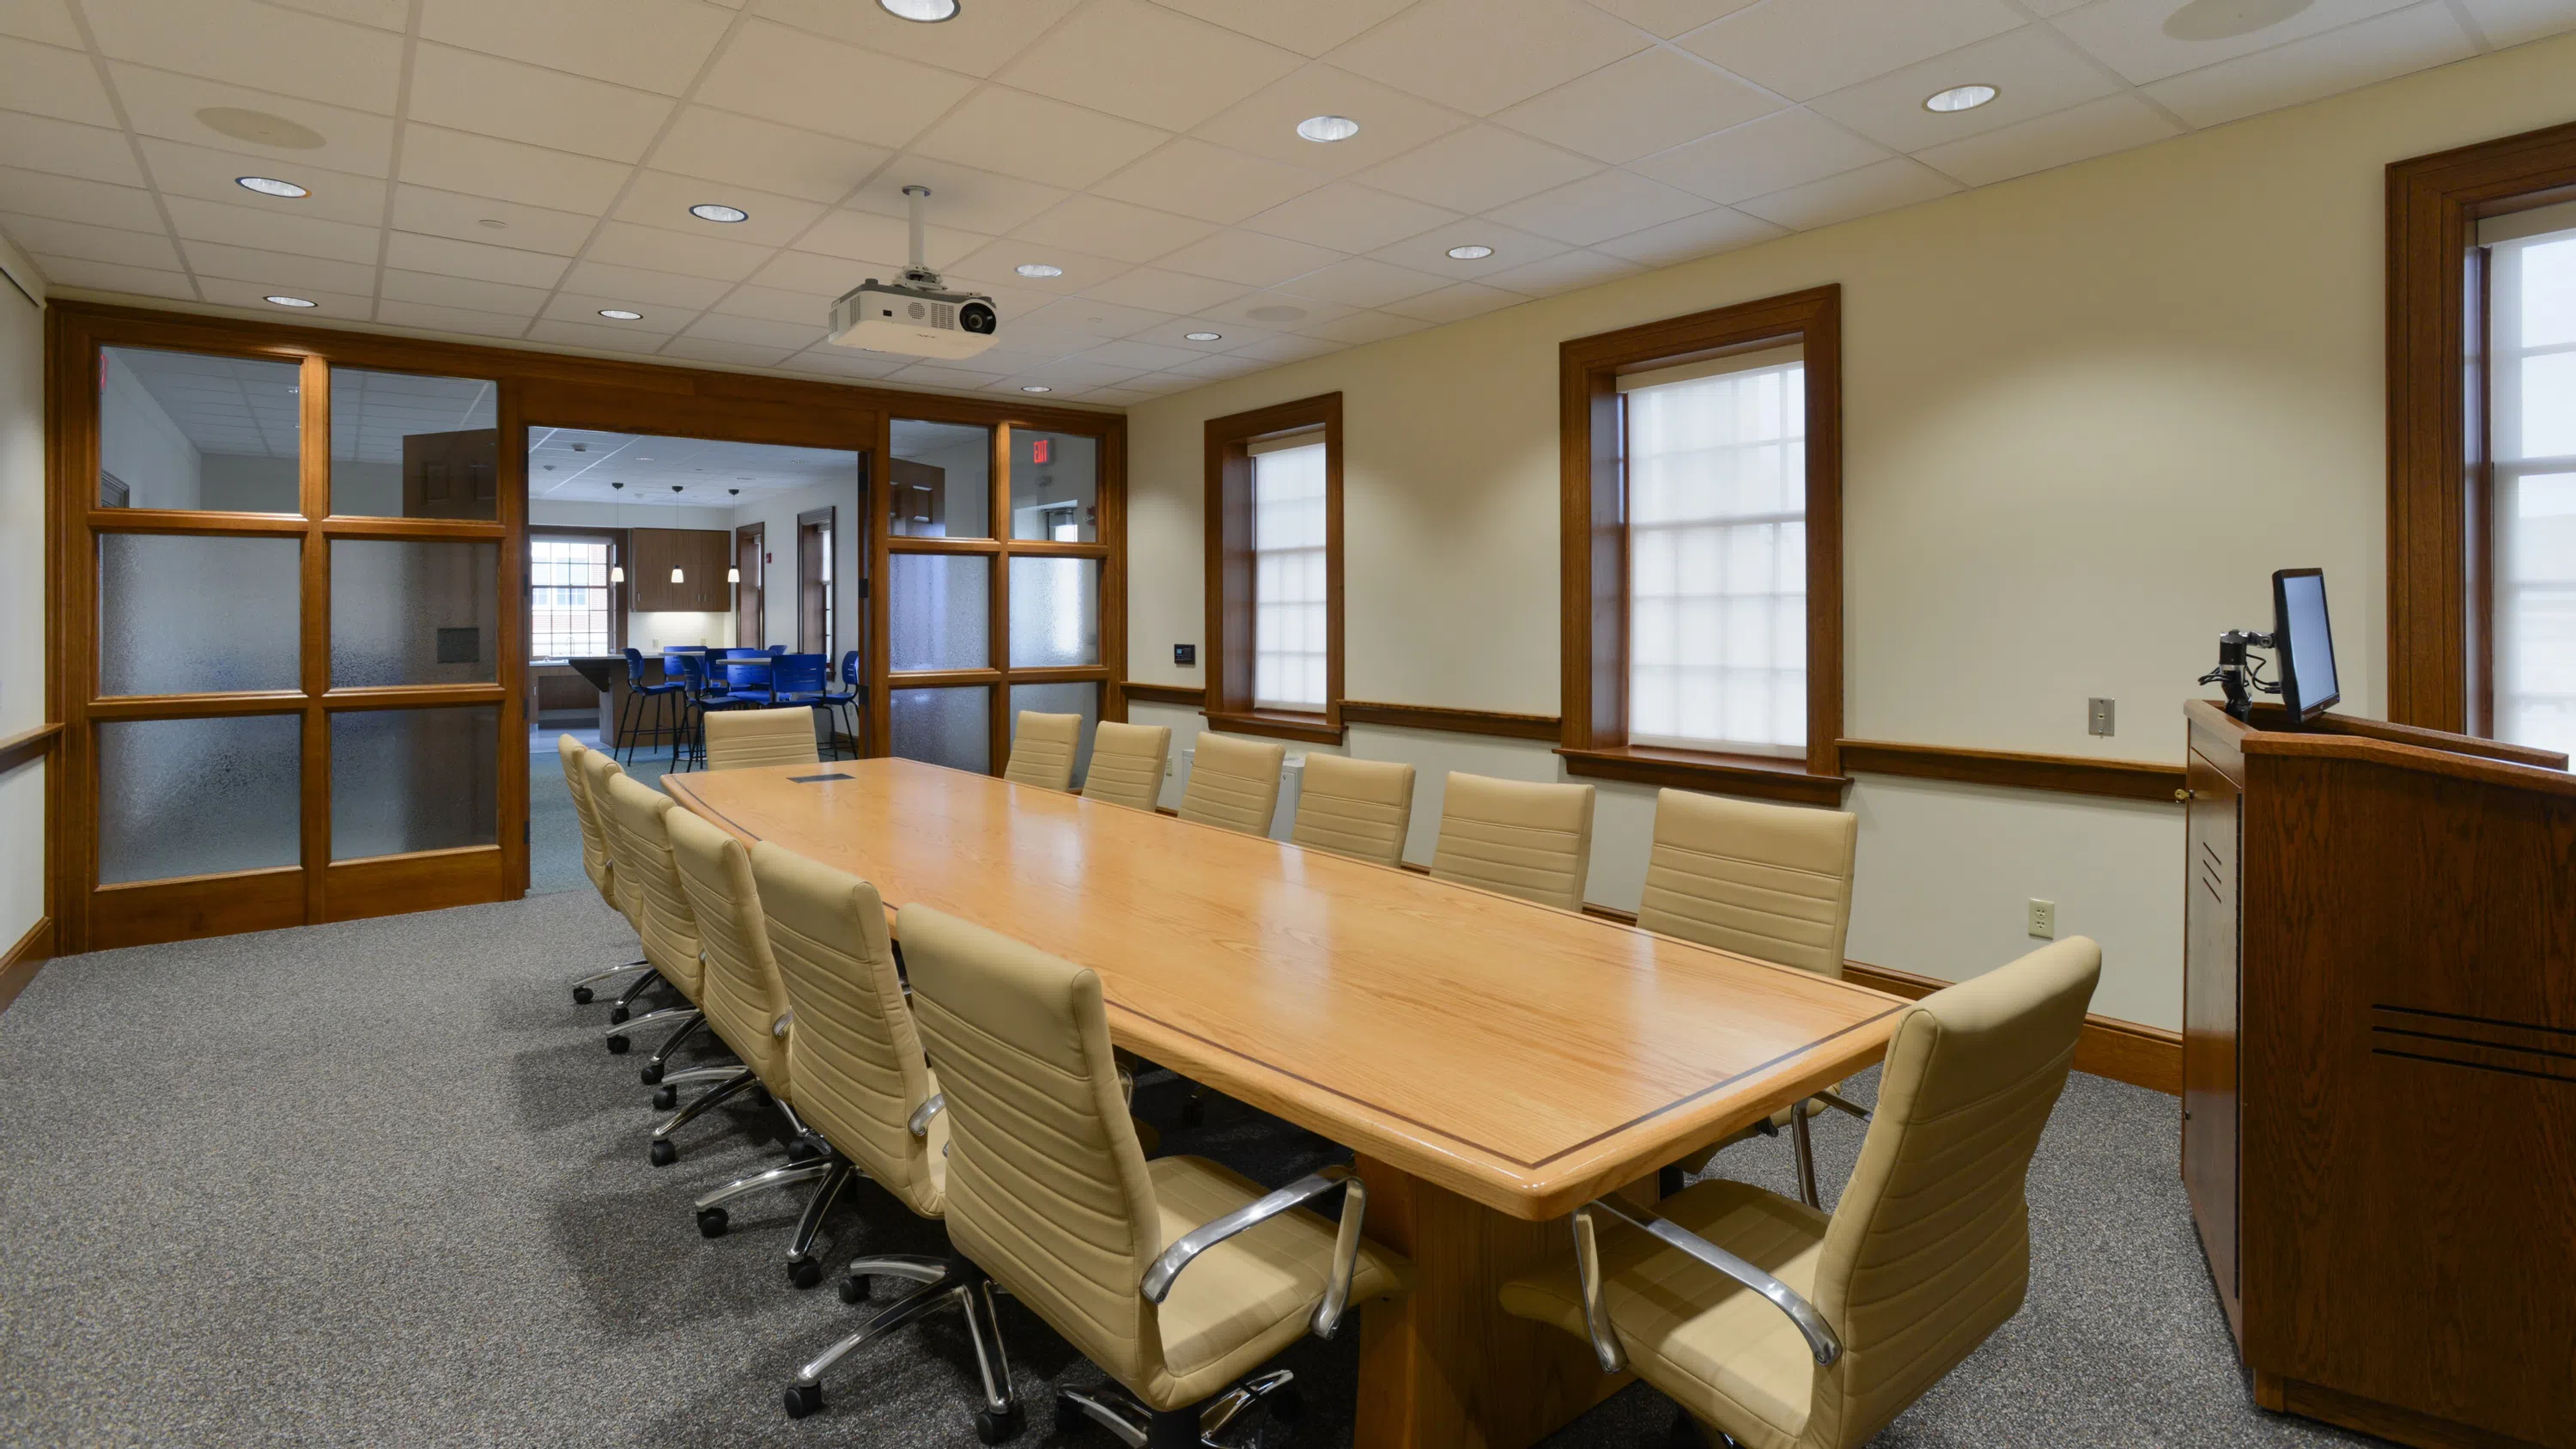 a long conference table with 14 chairs surrounding it and a podium in the foreground in a conference room